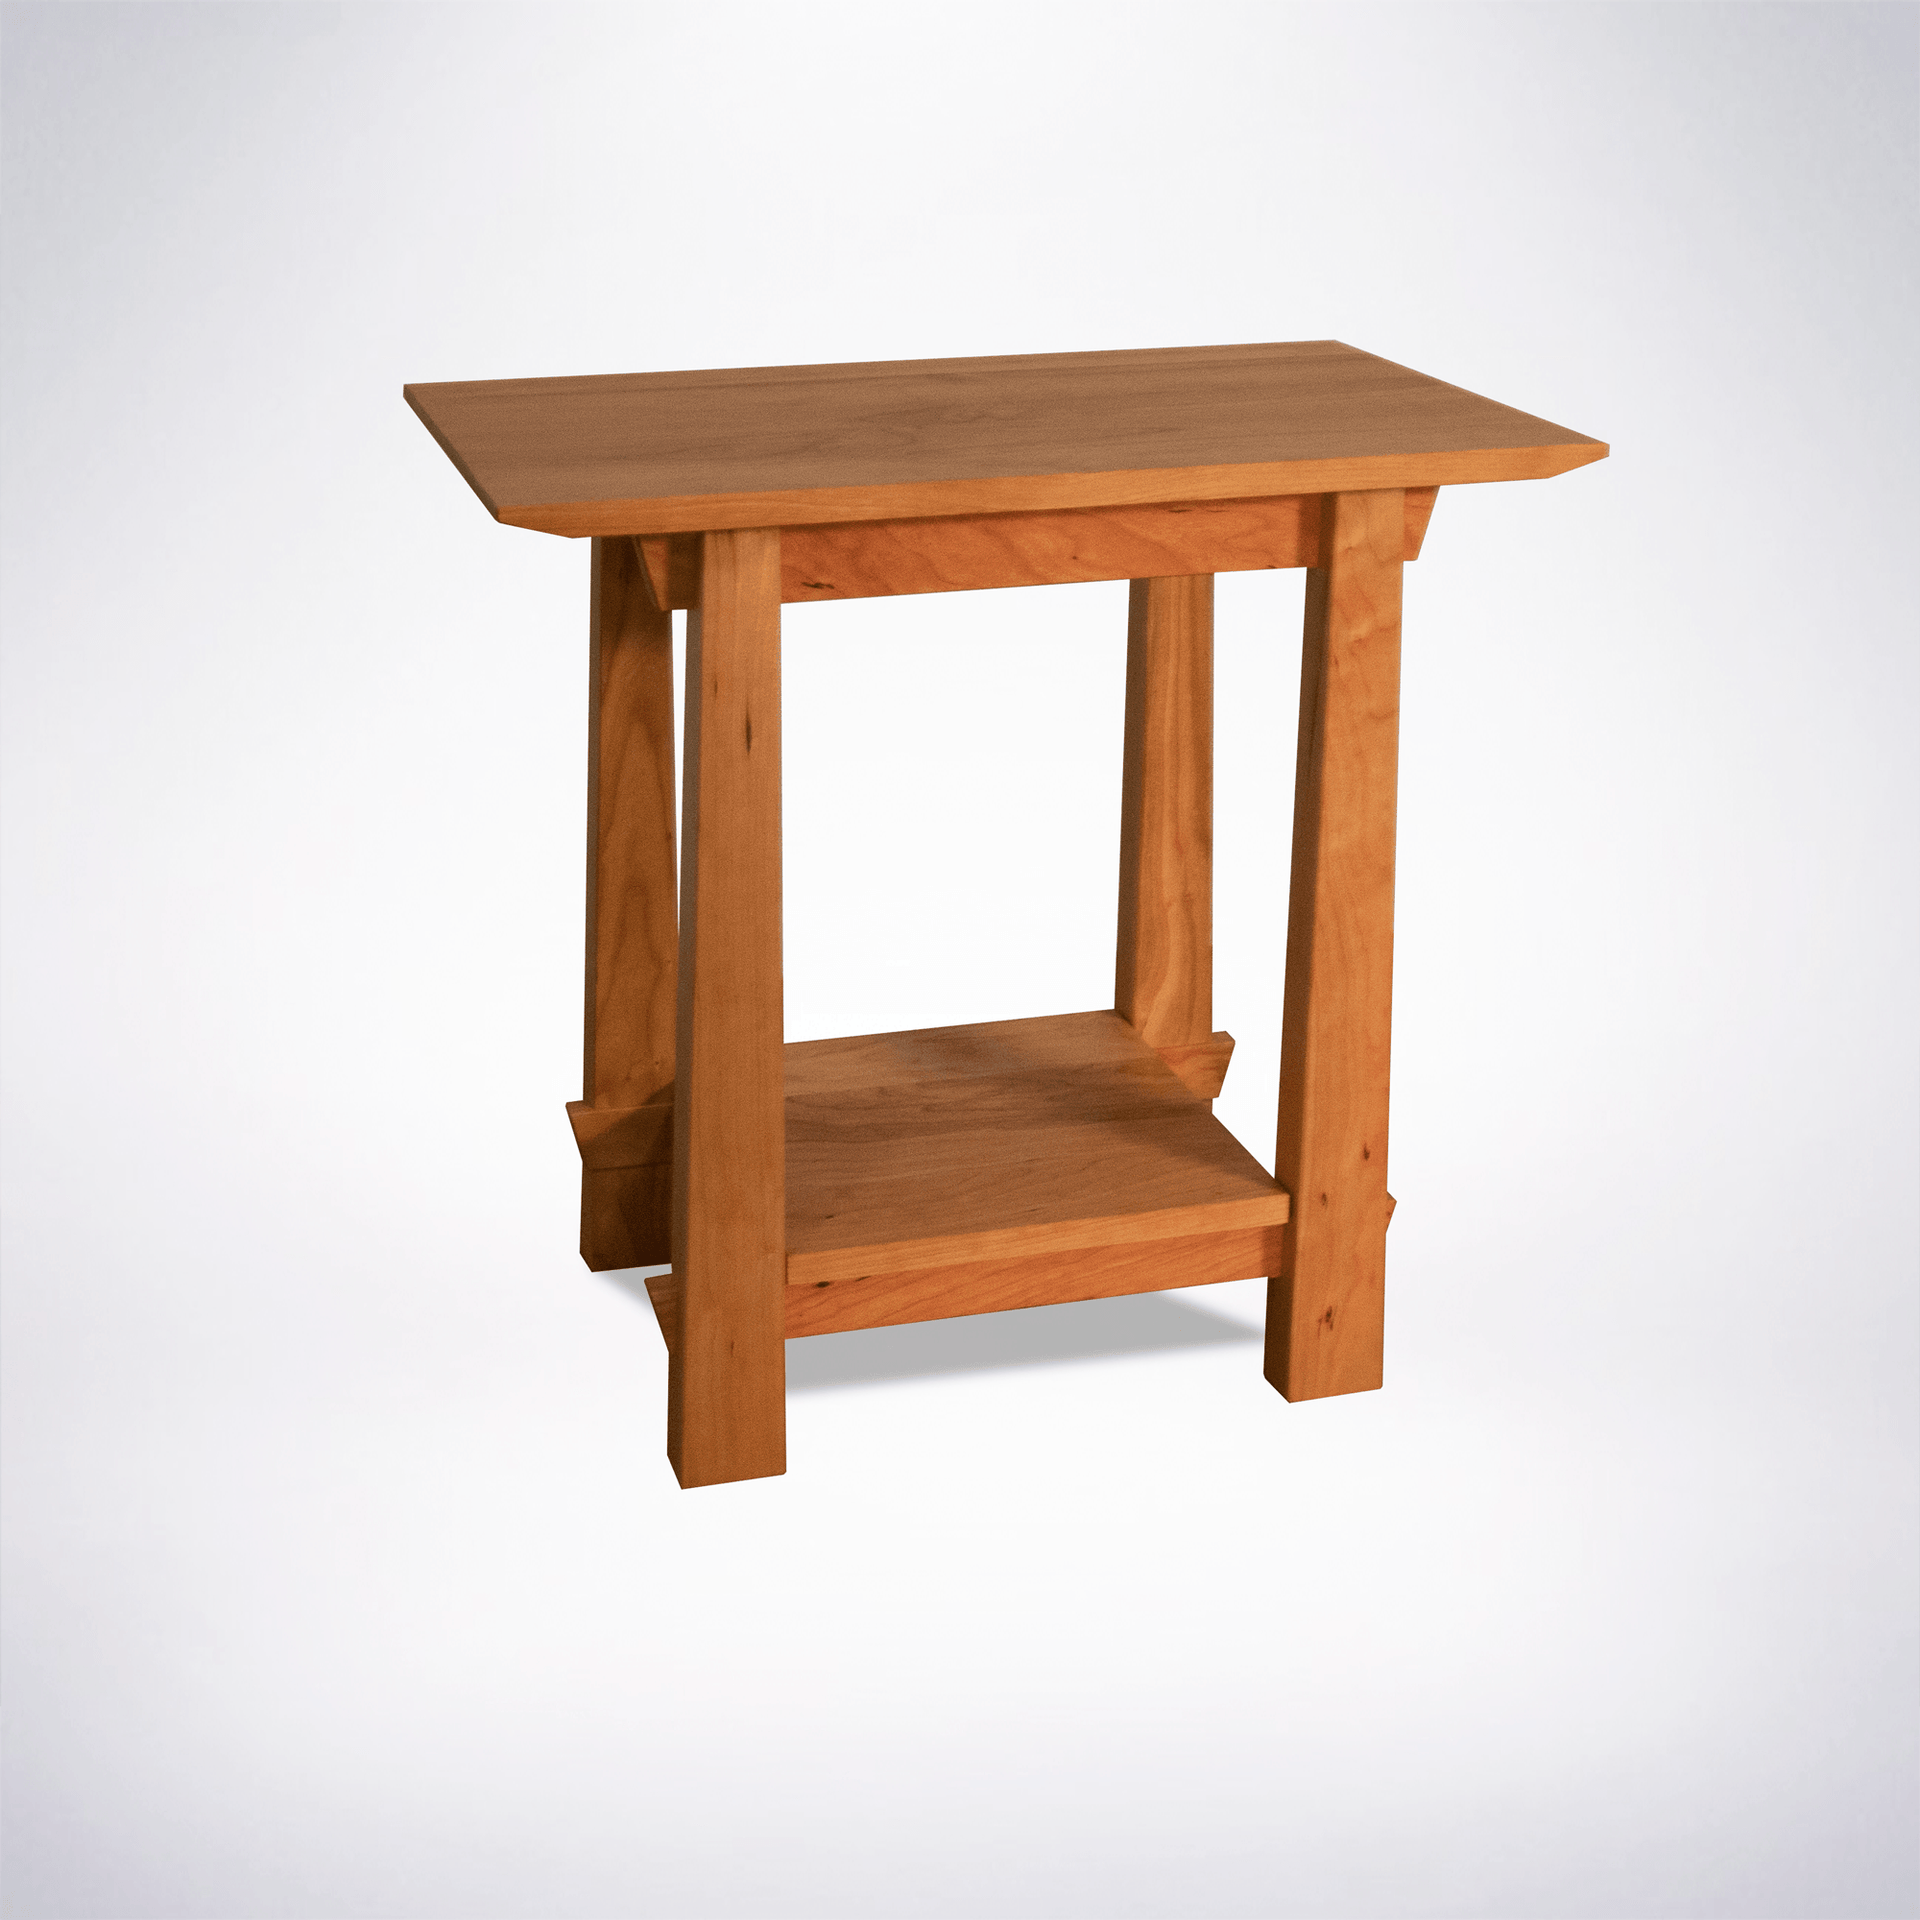 Solid Wood Side Table zero Voc Furniture